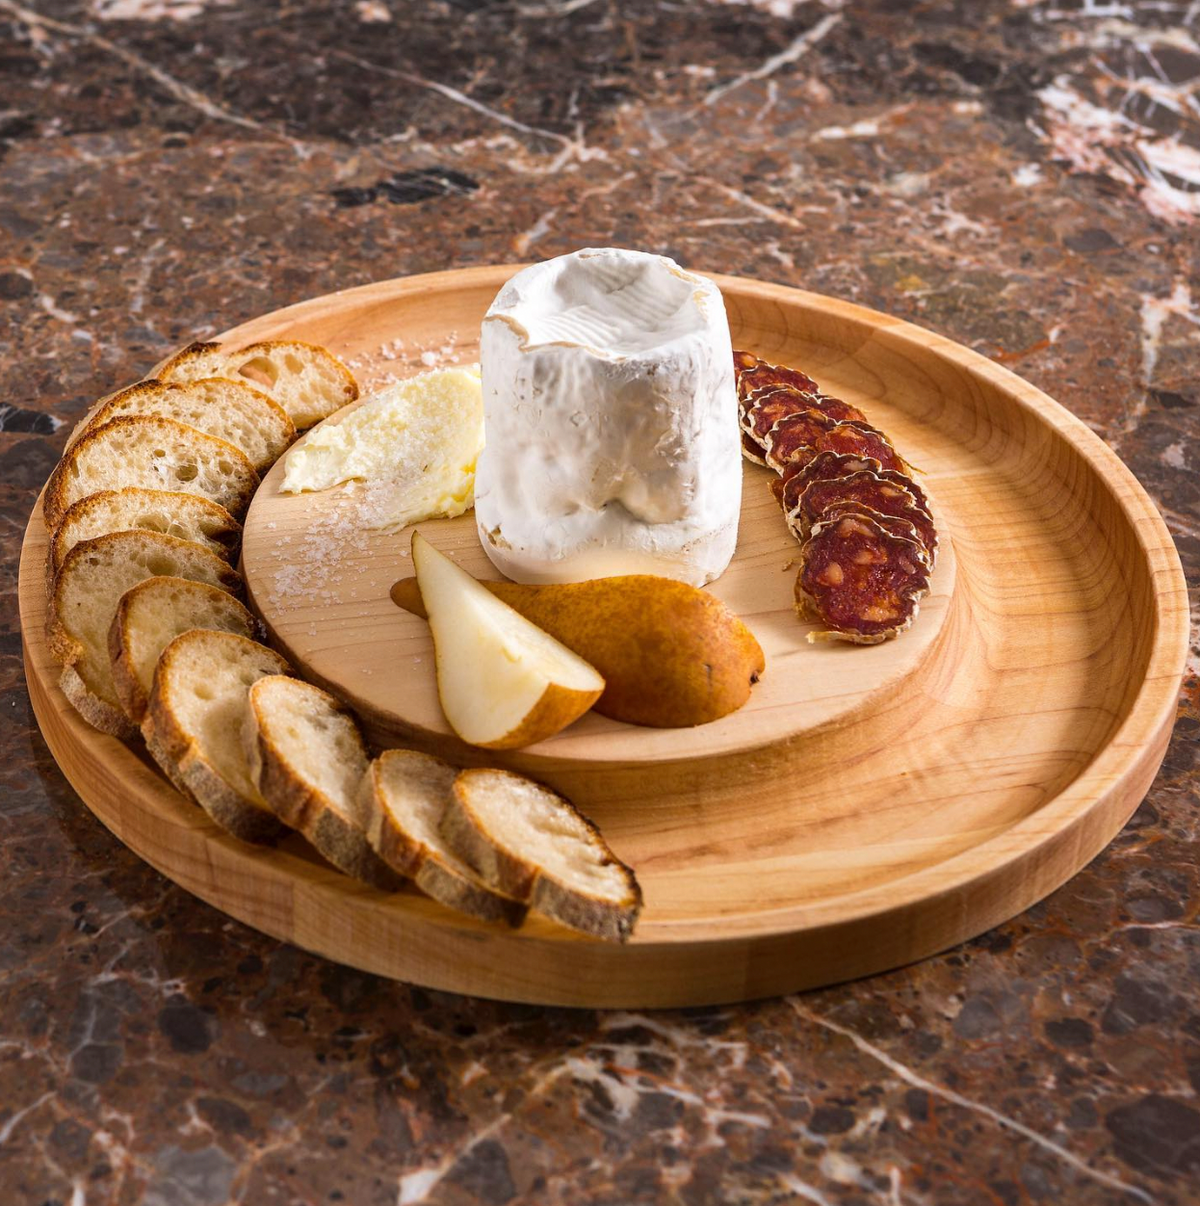 Maple Round Cheese Board